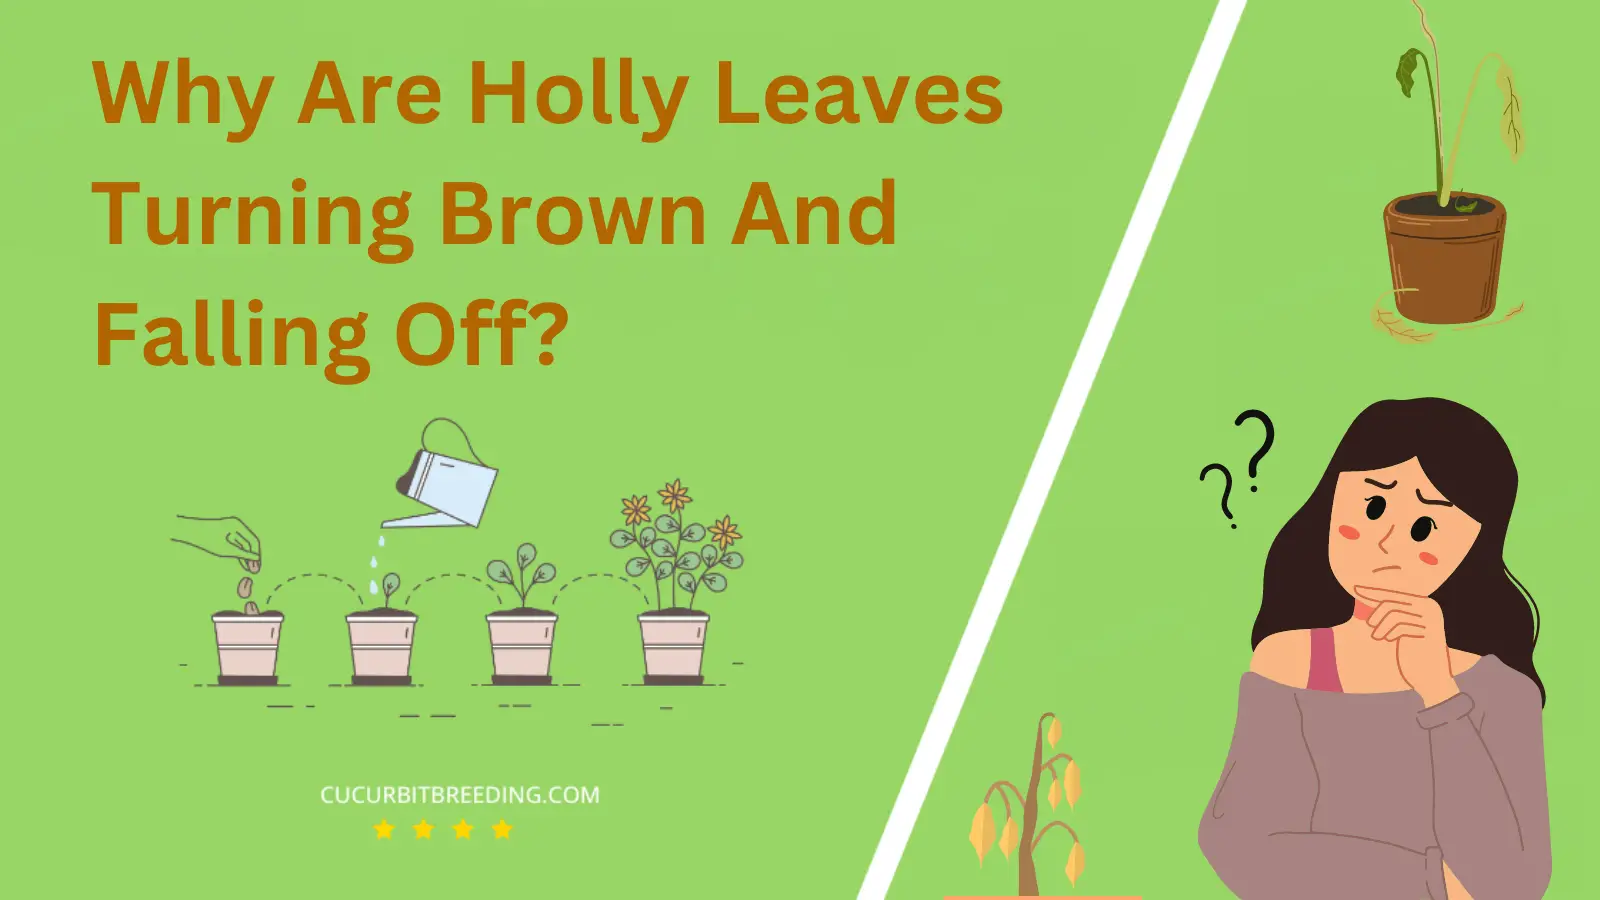 Why Are Holly Leaves Turning Brown And Falling Off